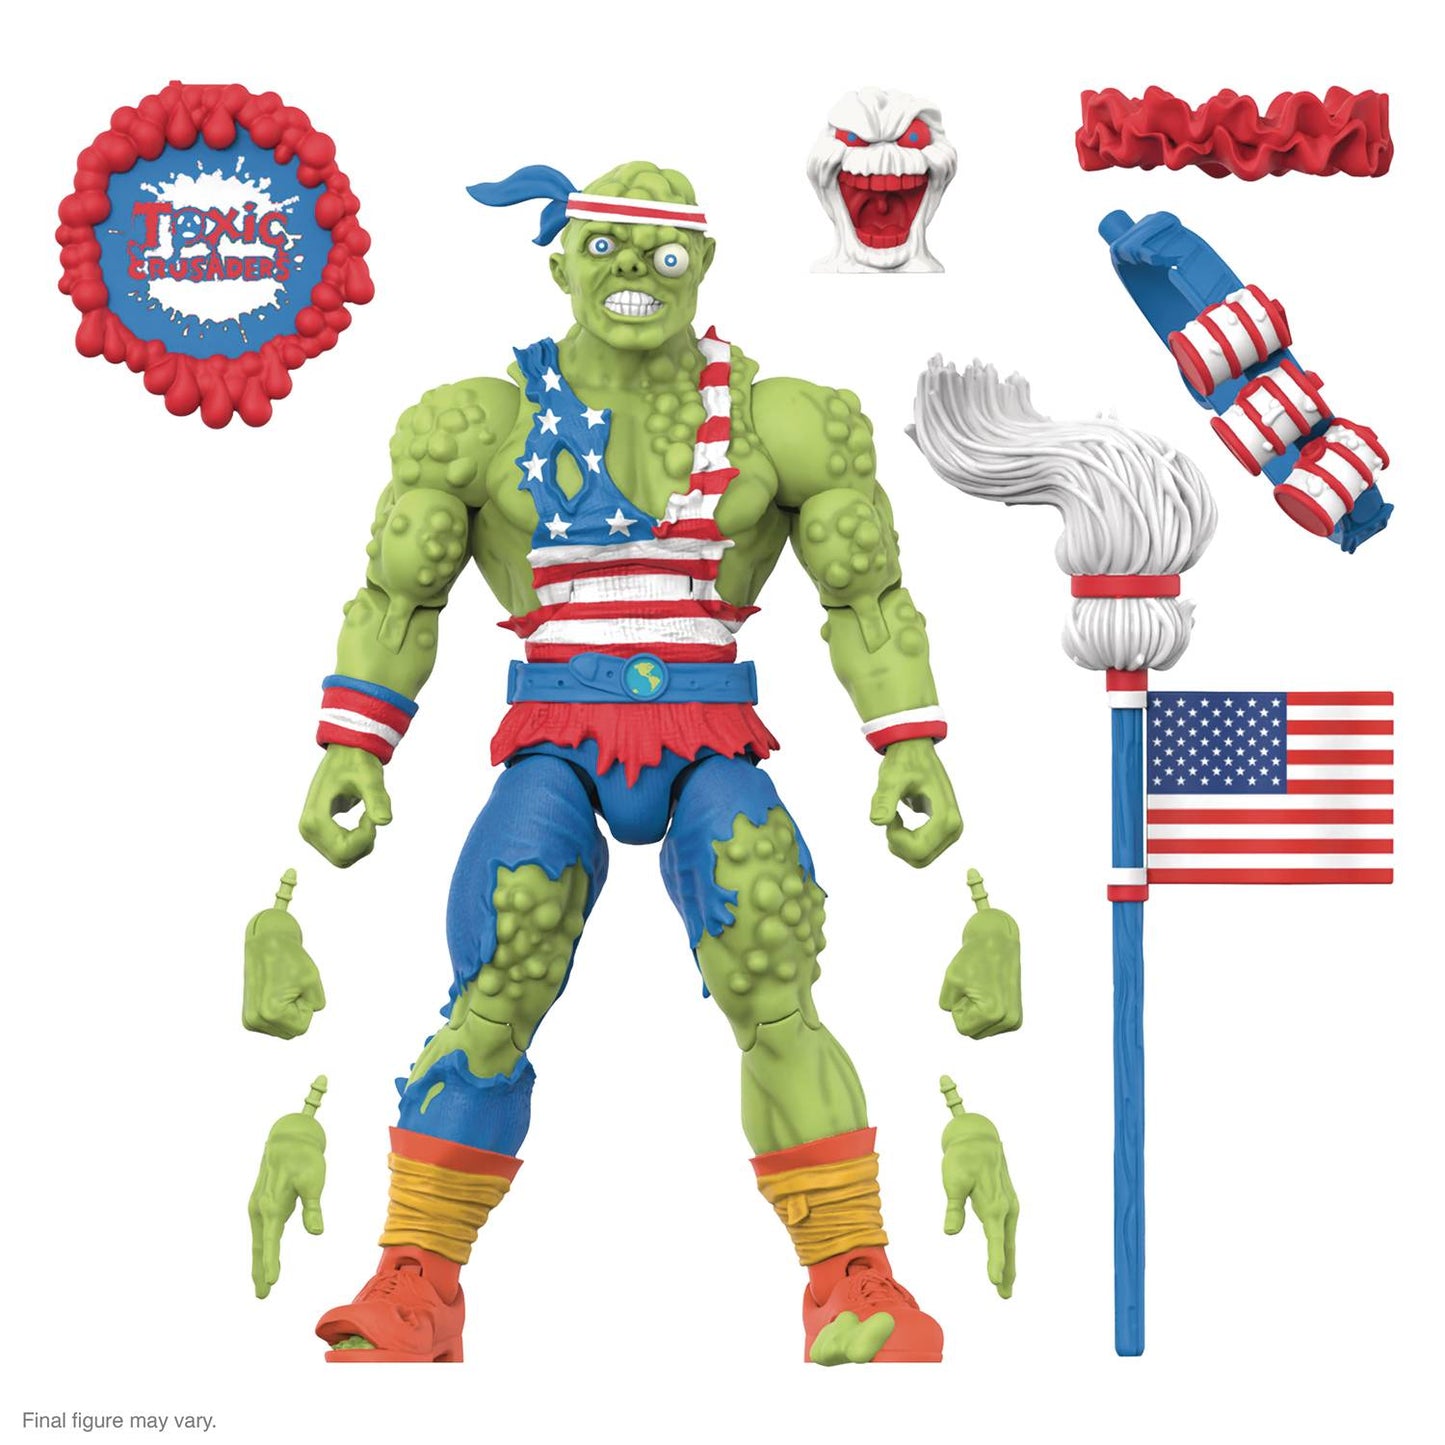 Super7 Toxic Crusaders Ultimates Wave 5 Toxie Action Figure